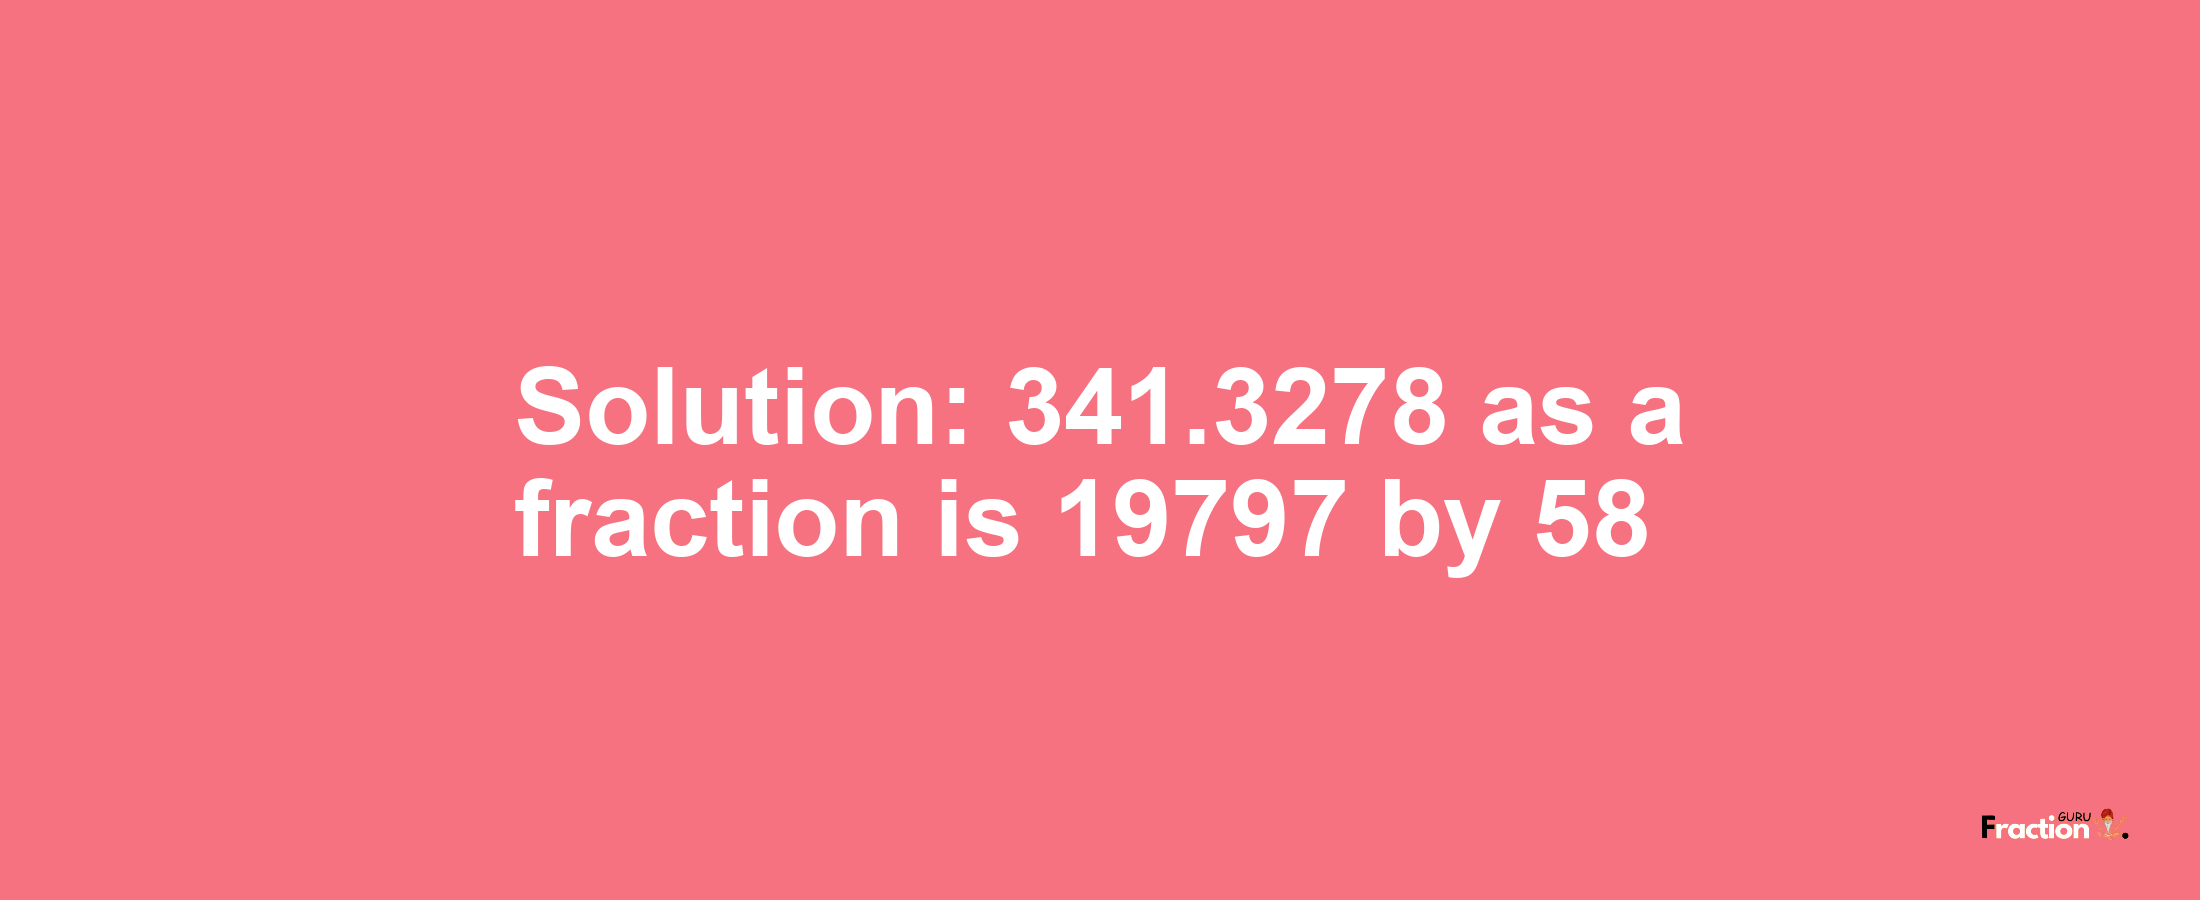 Solution:341.3278 as a fraction is 19797/58